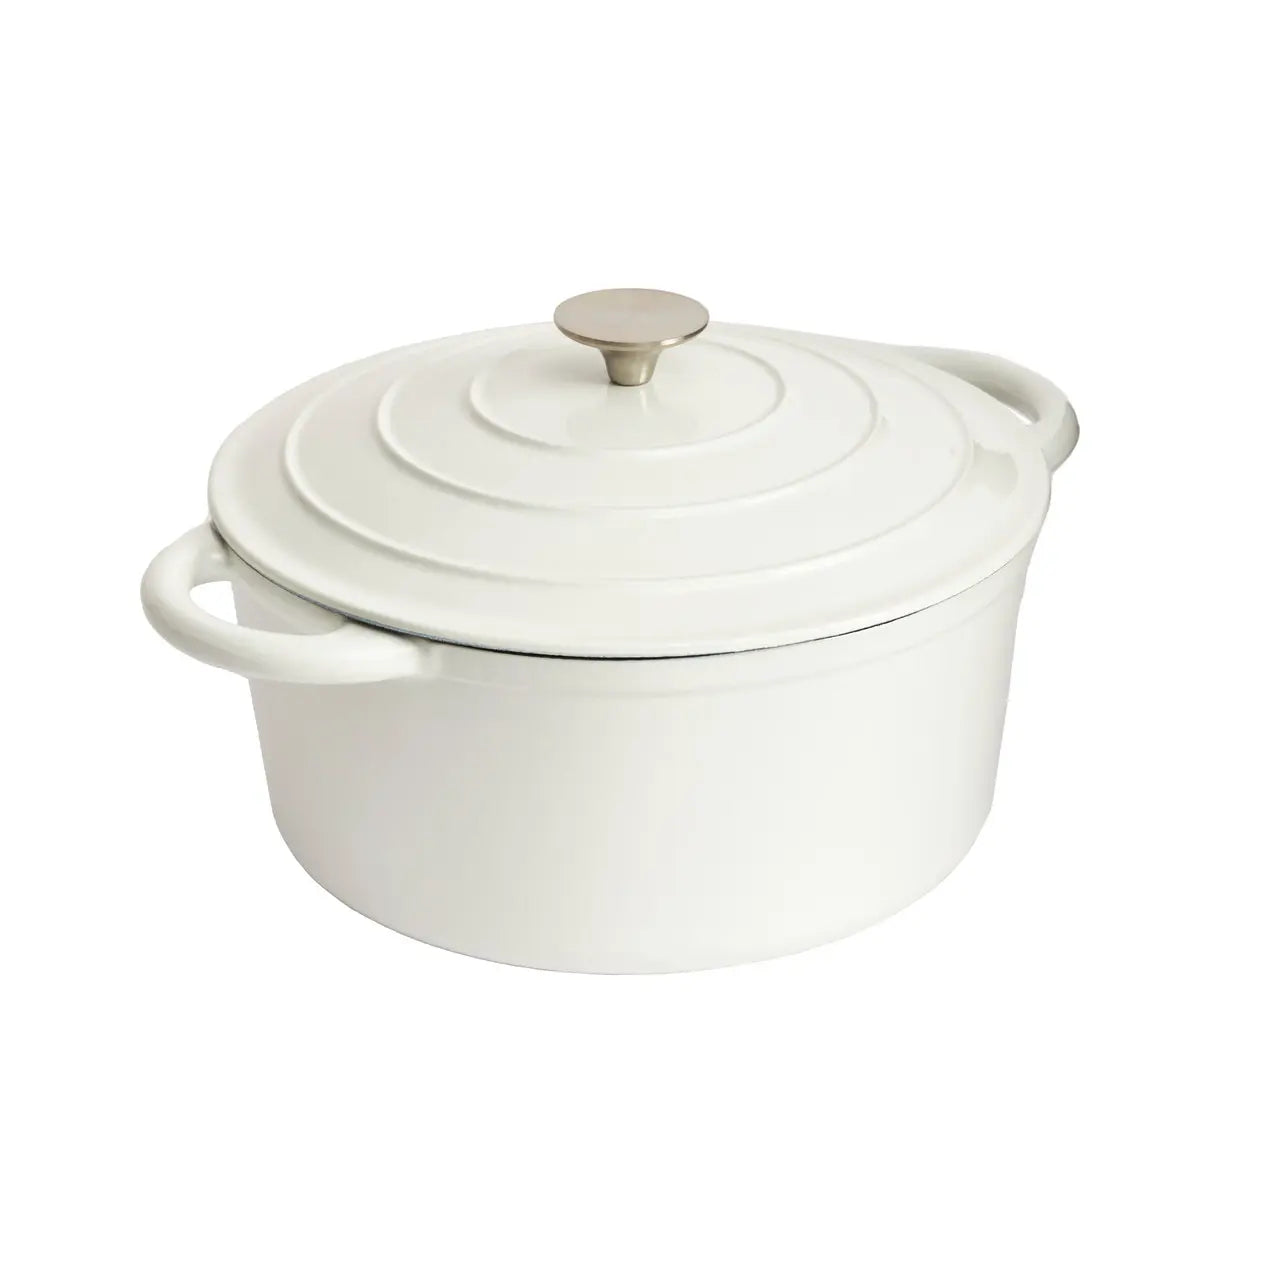 Enameled Cast Iron 9.5 inch Round Dutch Oven in White